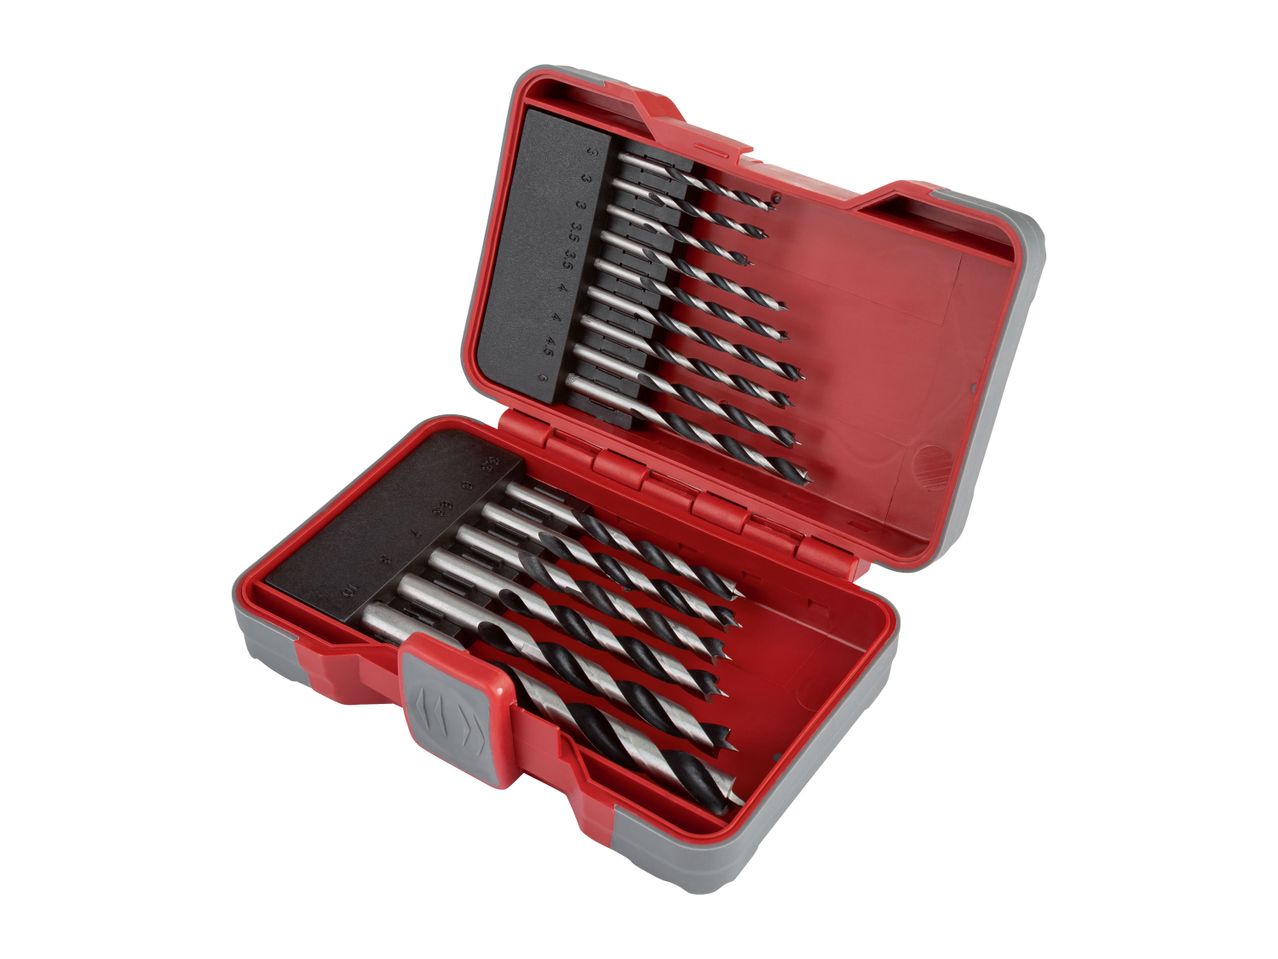 Go to full screen view: PARKSIDE Bit / Drill Bit Set - Image 5